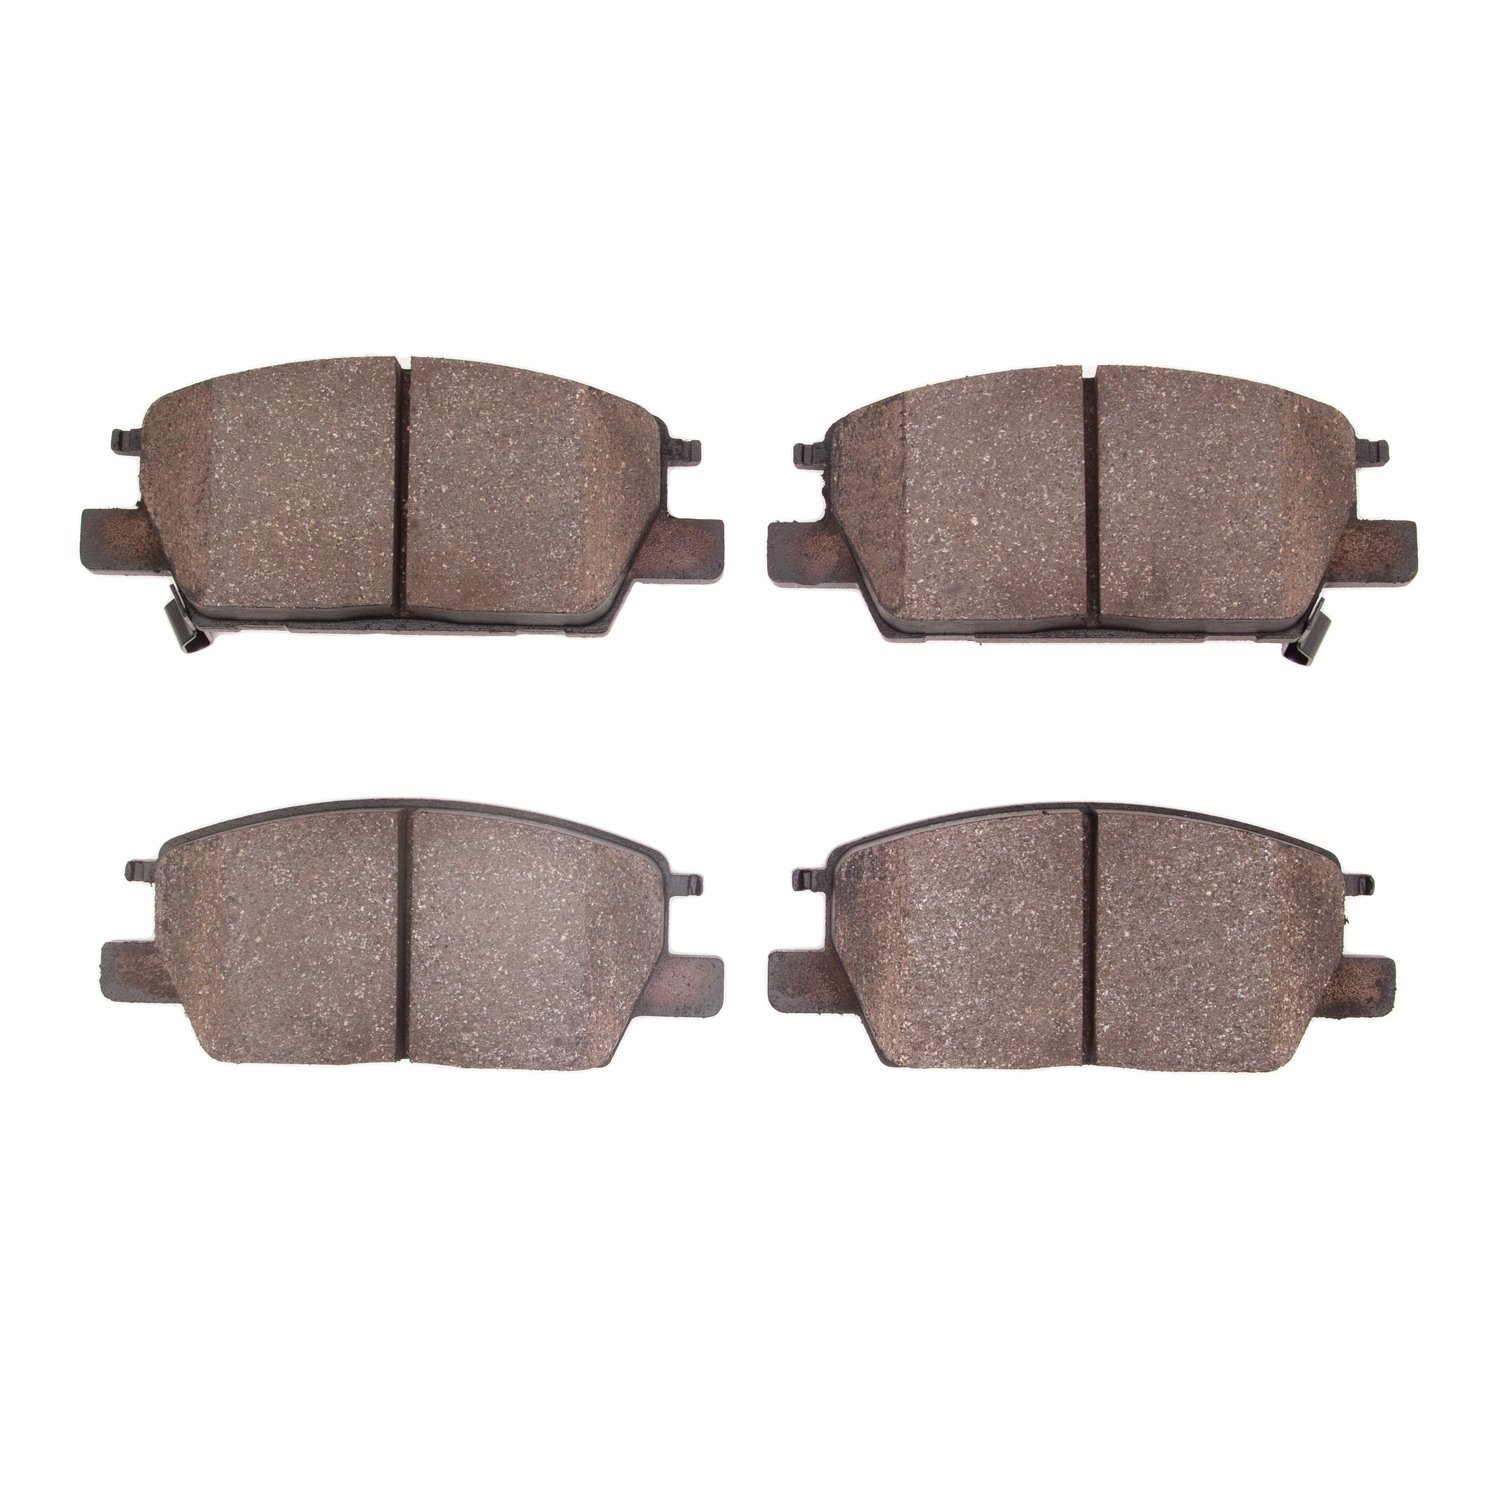 1310-1913-00 3000-Series Ceramic Brake Pads, Fits Select GM, Position: Front